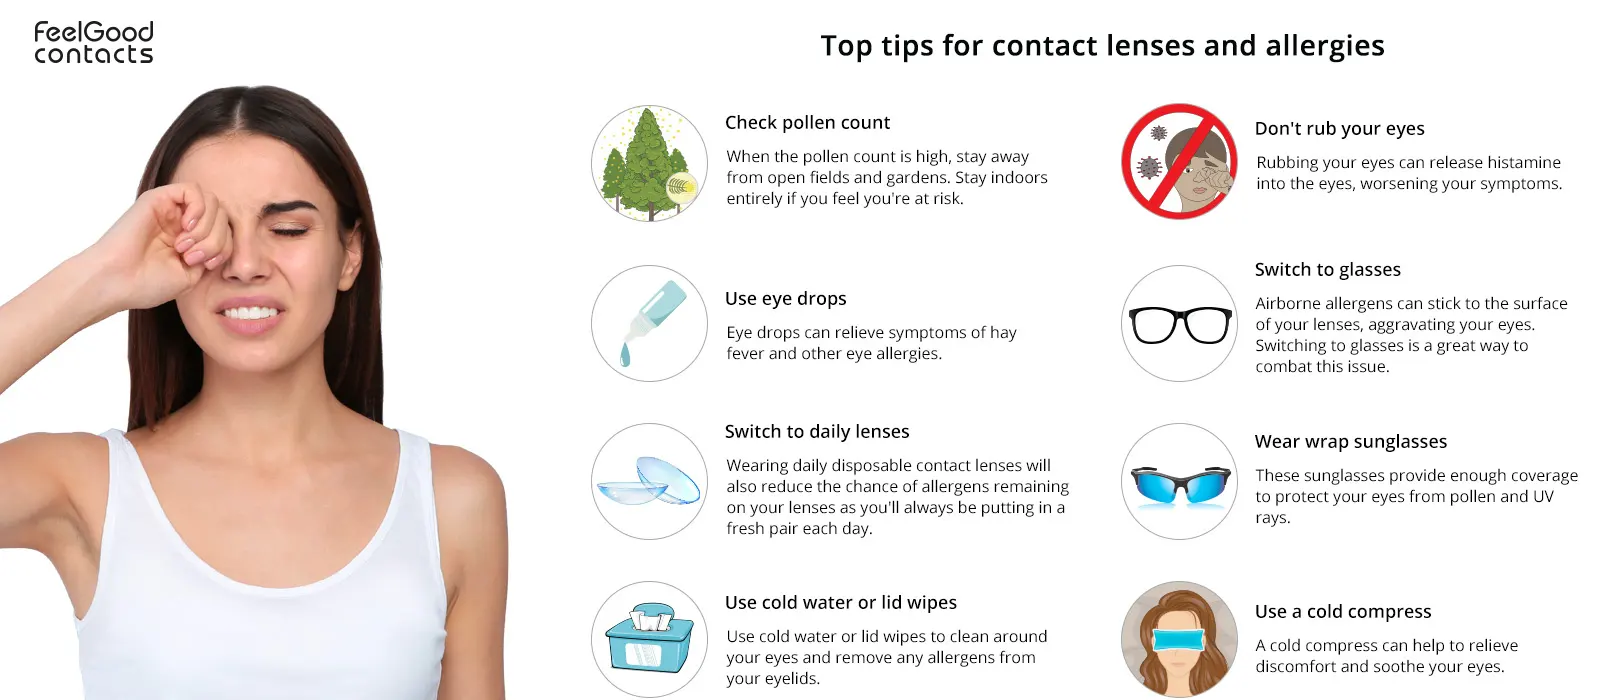 tips for contact lenses and allergies